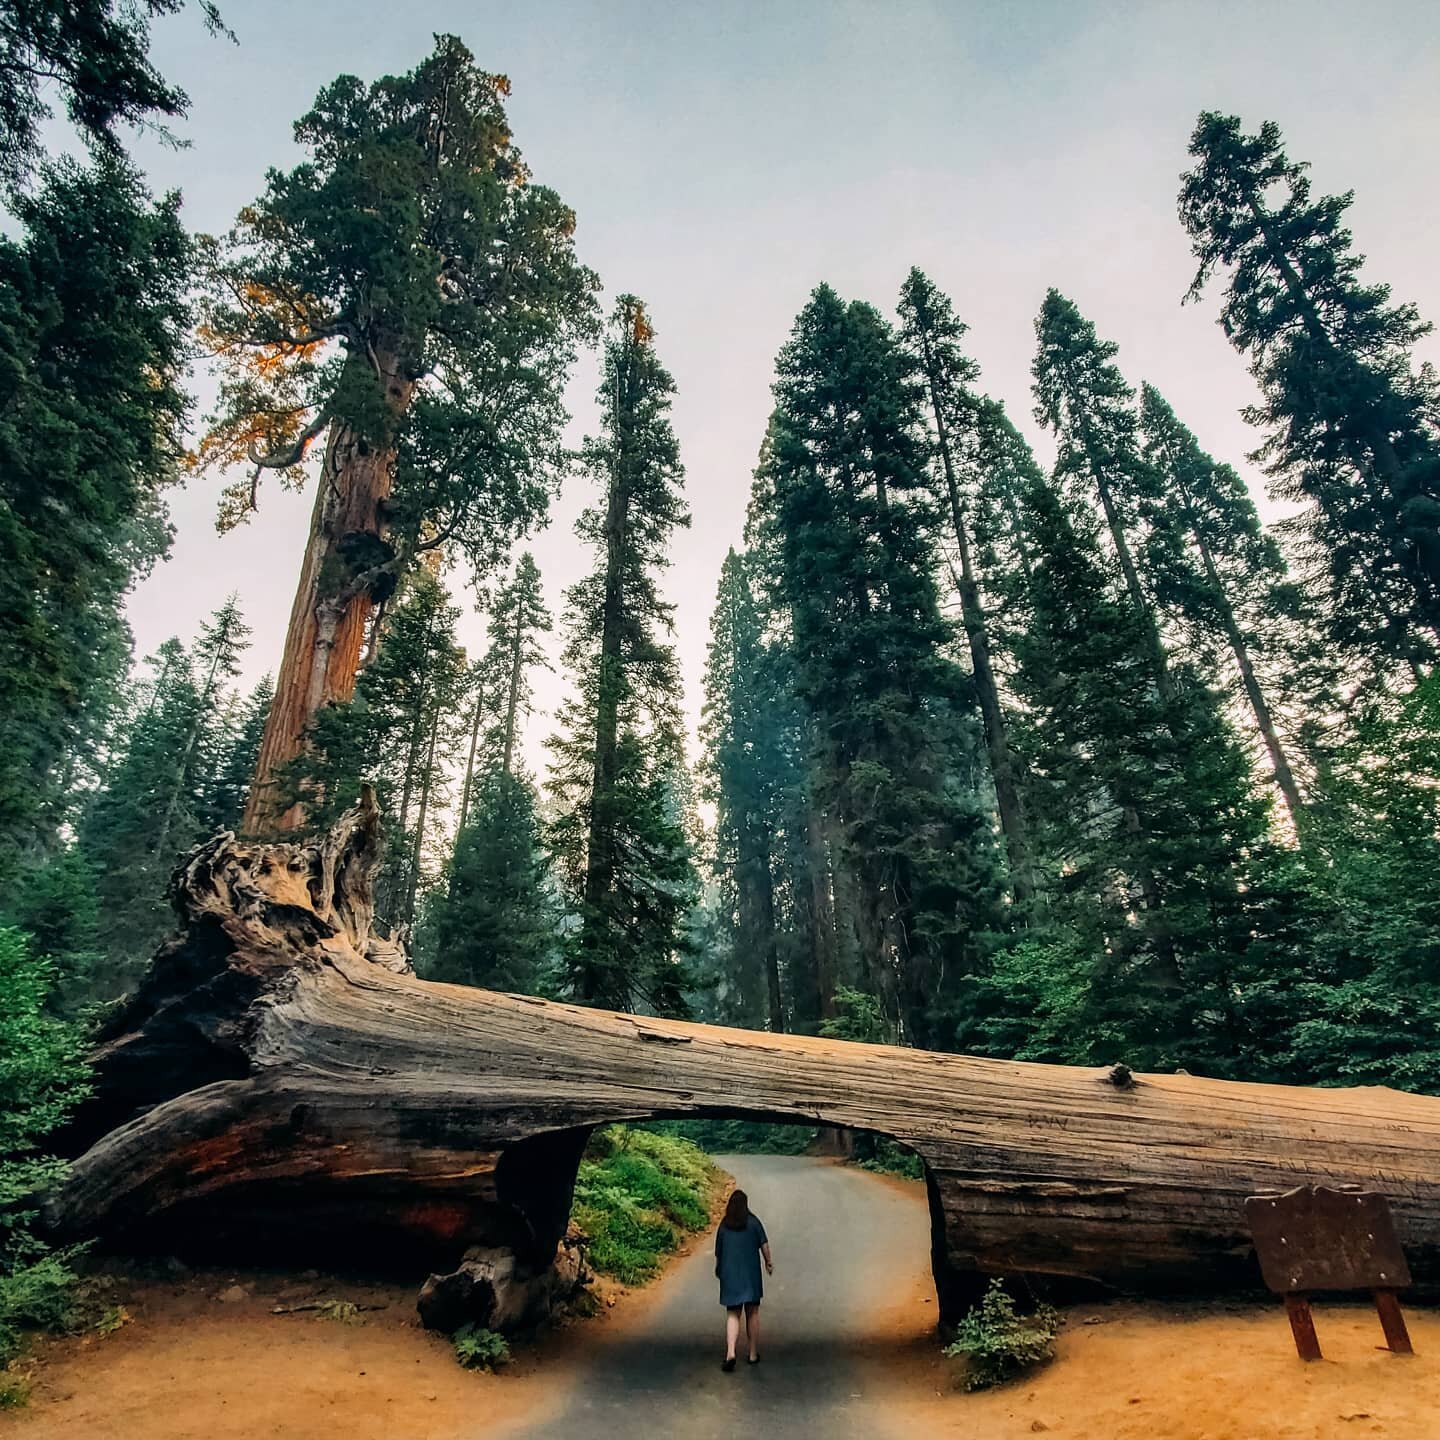 POV: you're walking through this forest and not the hellish nightmare that is 2020